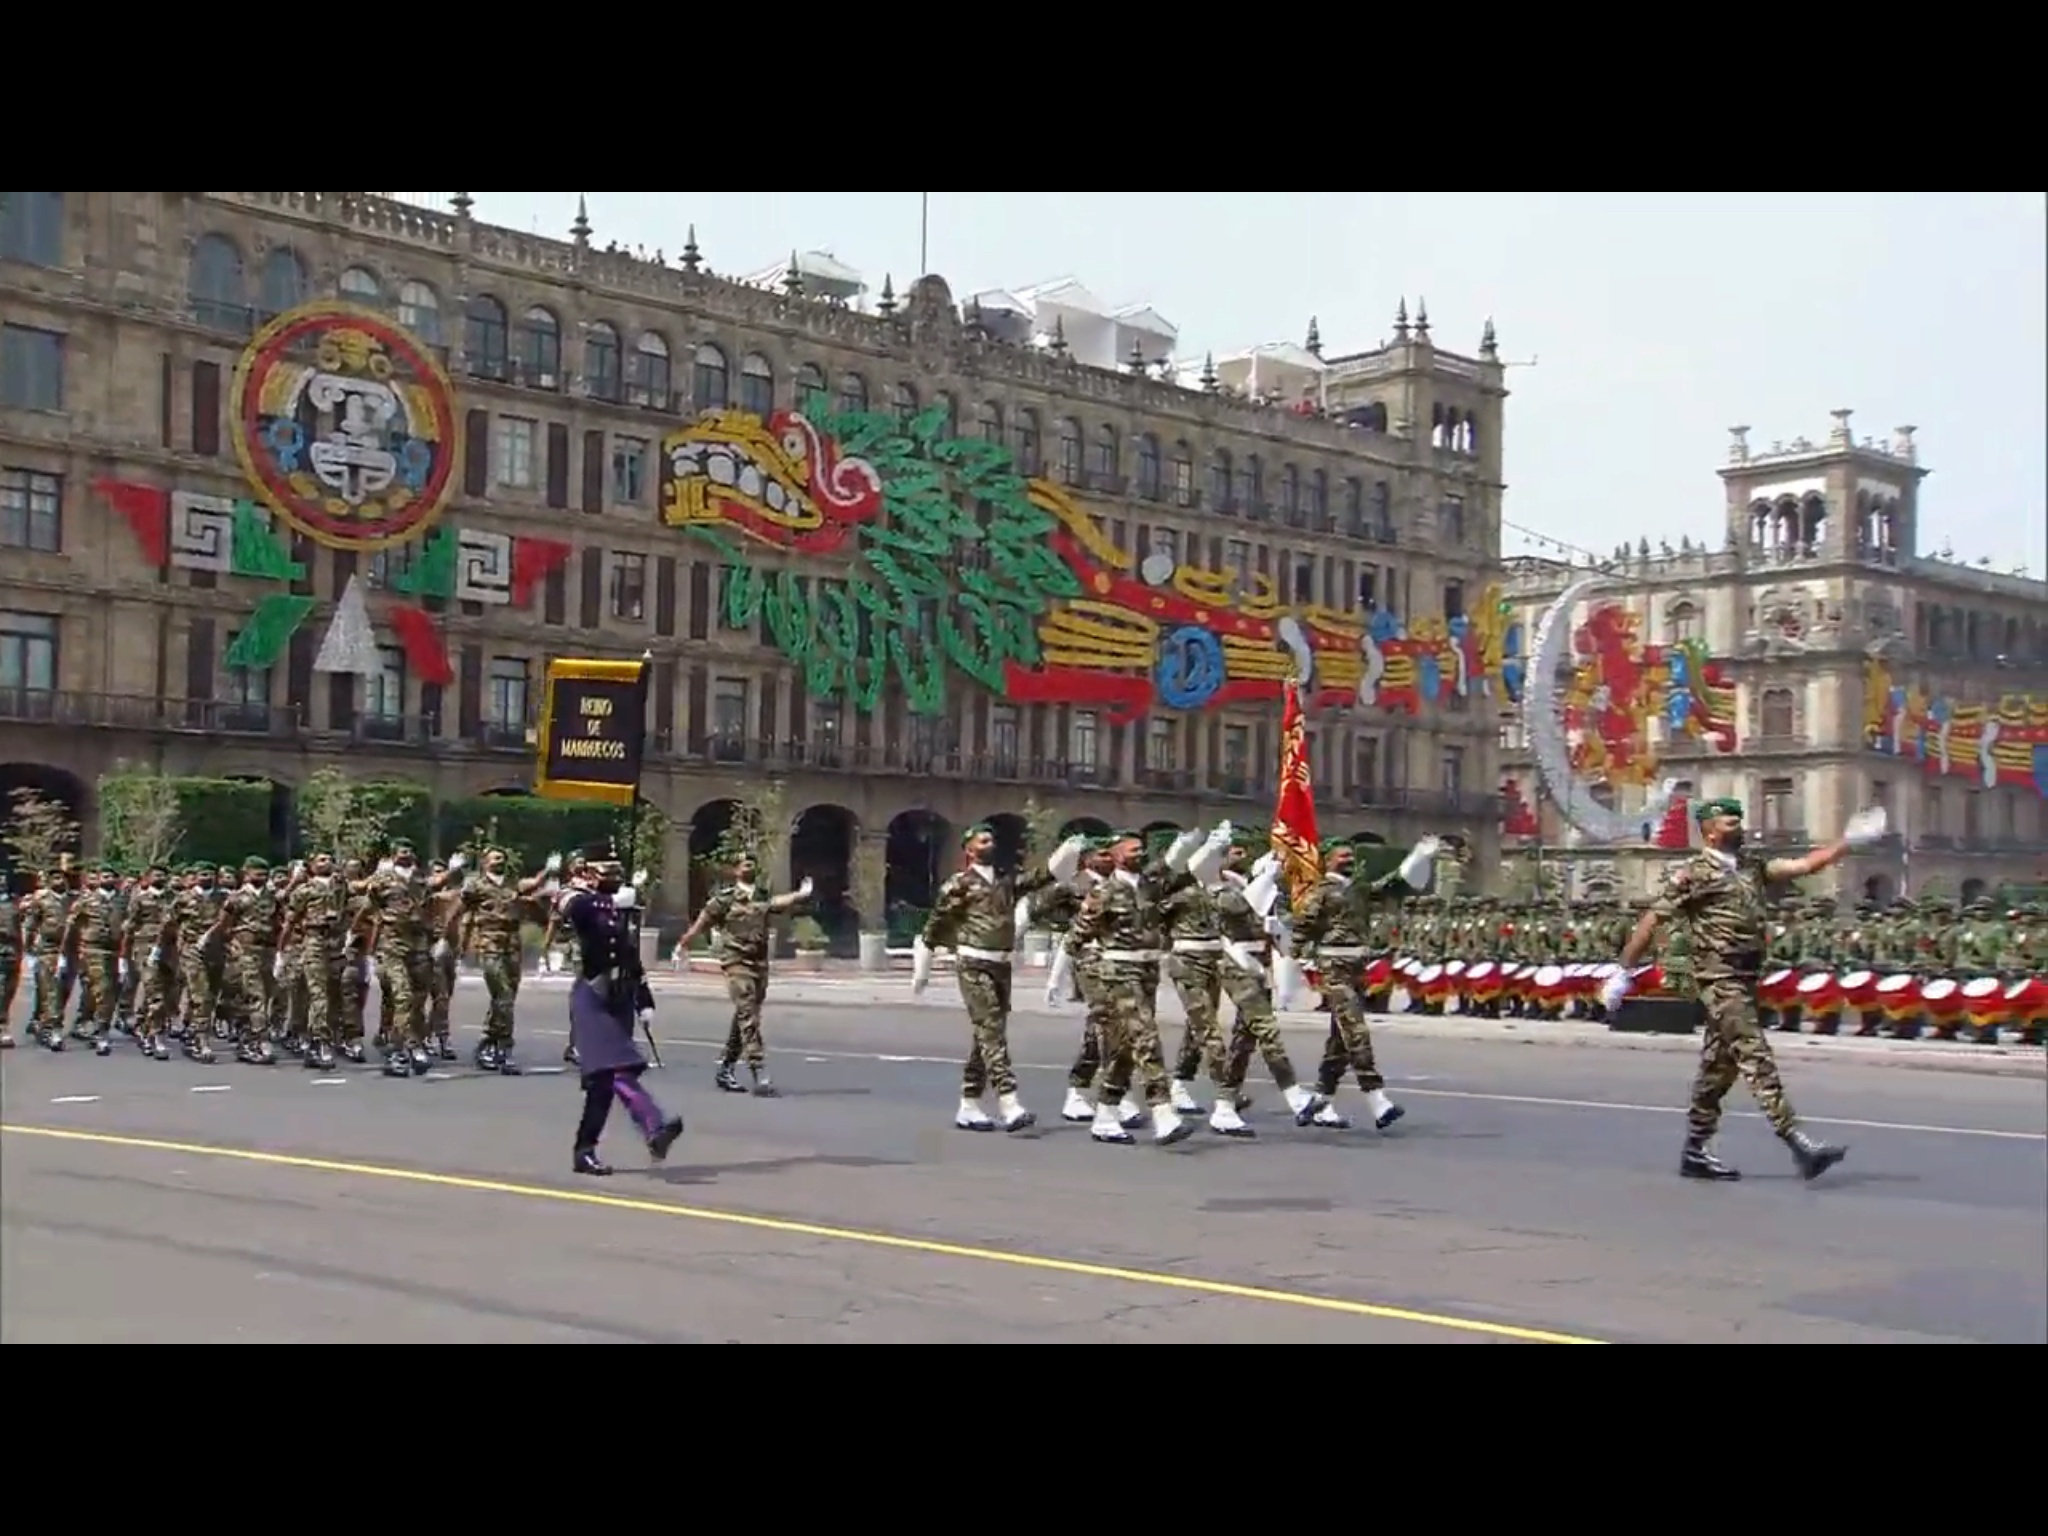 FAR detachment participates in traditional military parade celebrating Mexico’s Independence